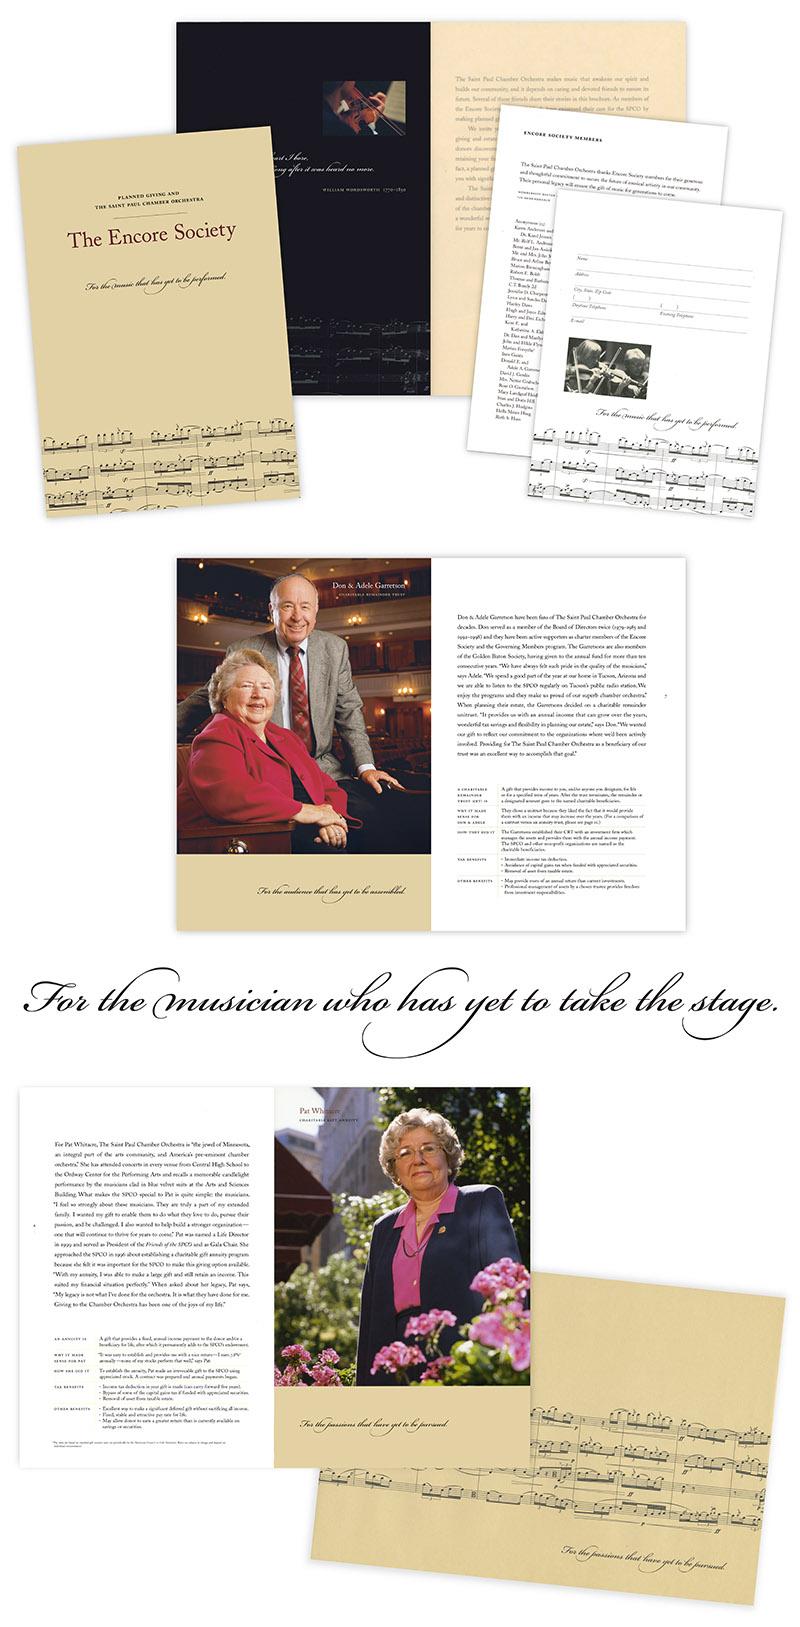 Collage of pages showing "The Encore Society" brochure designed for The Saint Paul Chamber Orchestra by Carolyn Porter of Porterfolio, Inc.